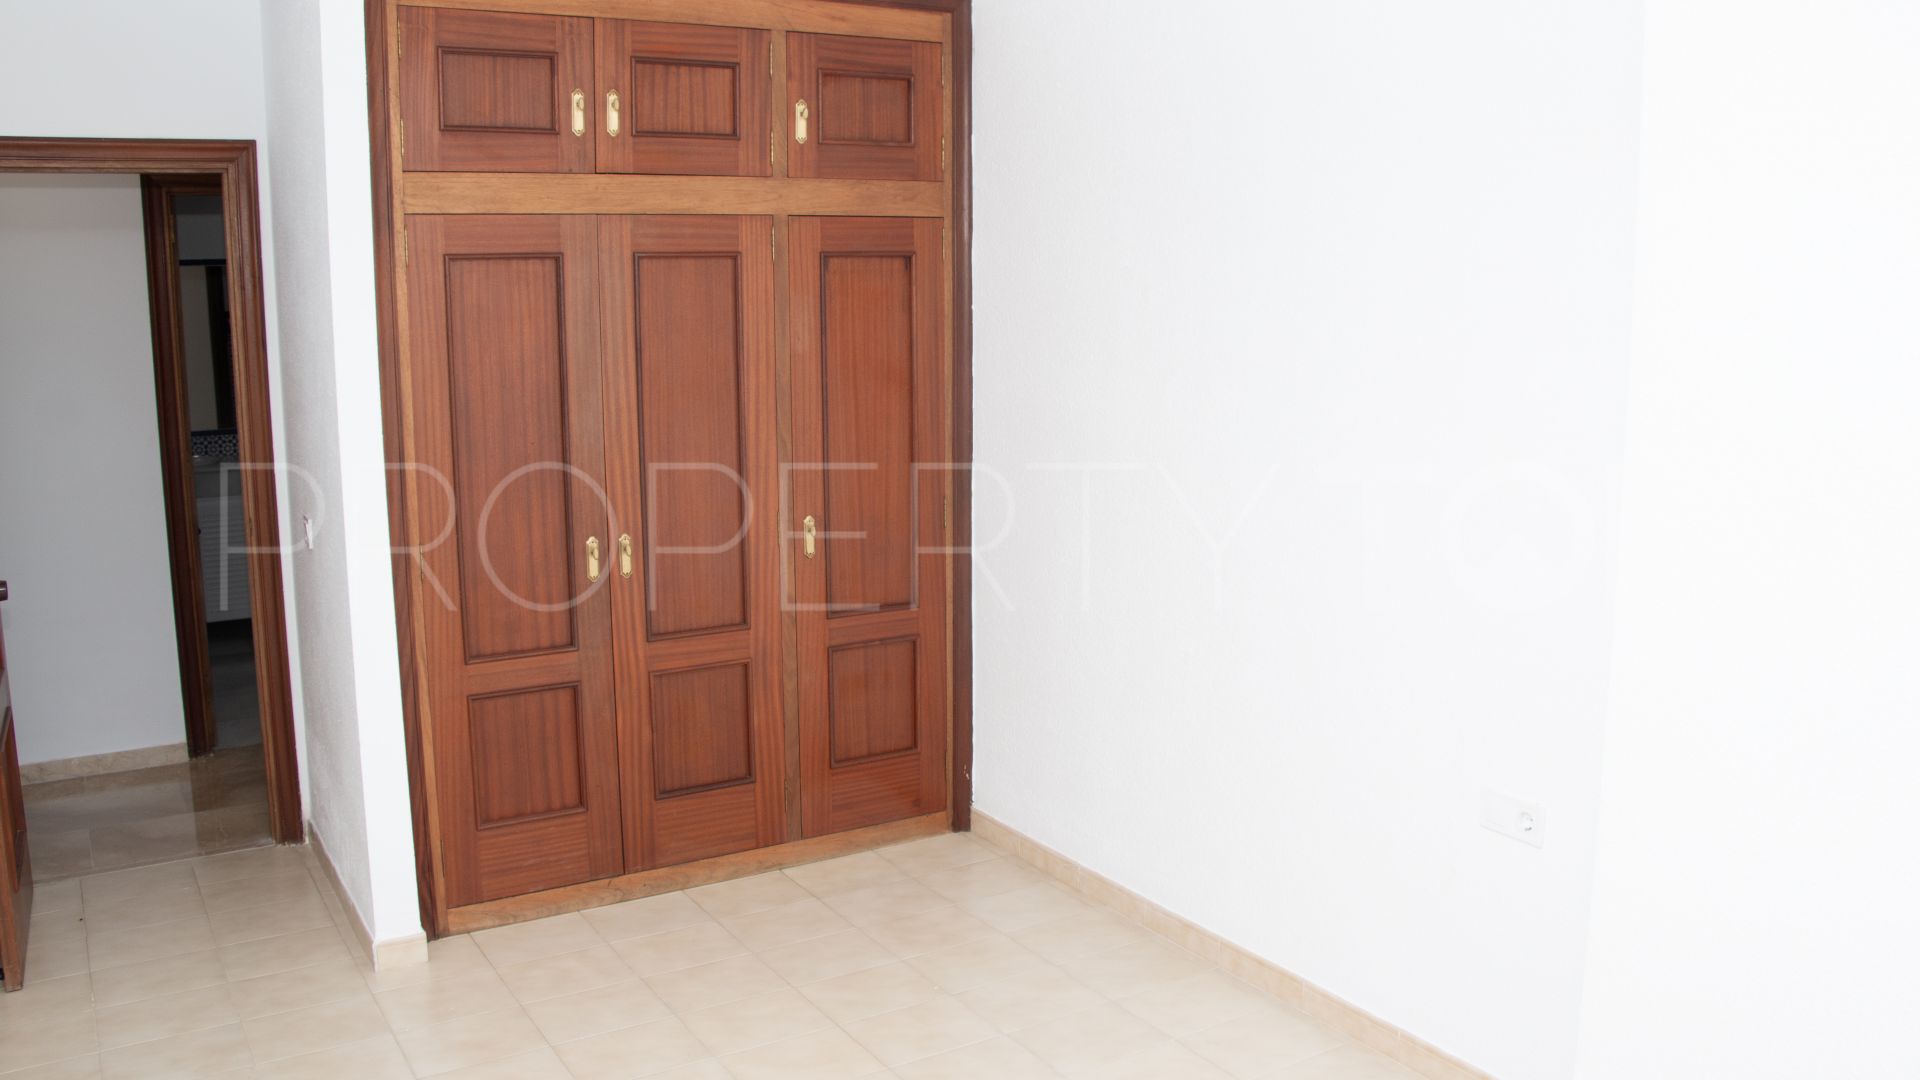 For sale Seghers ground floor apartment with 3 bedrooms